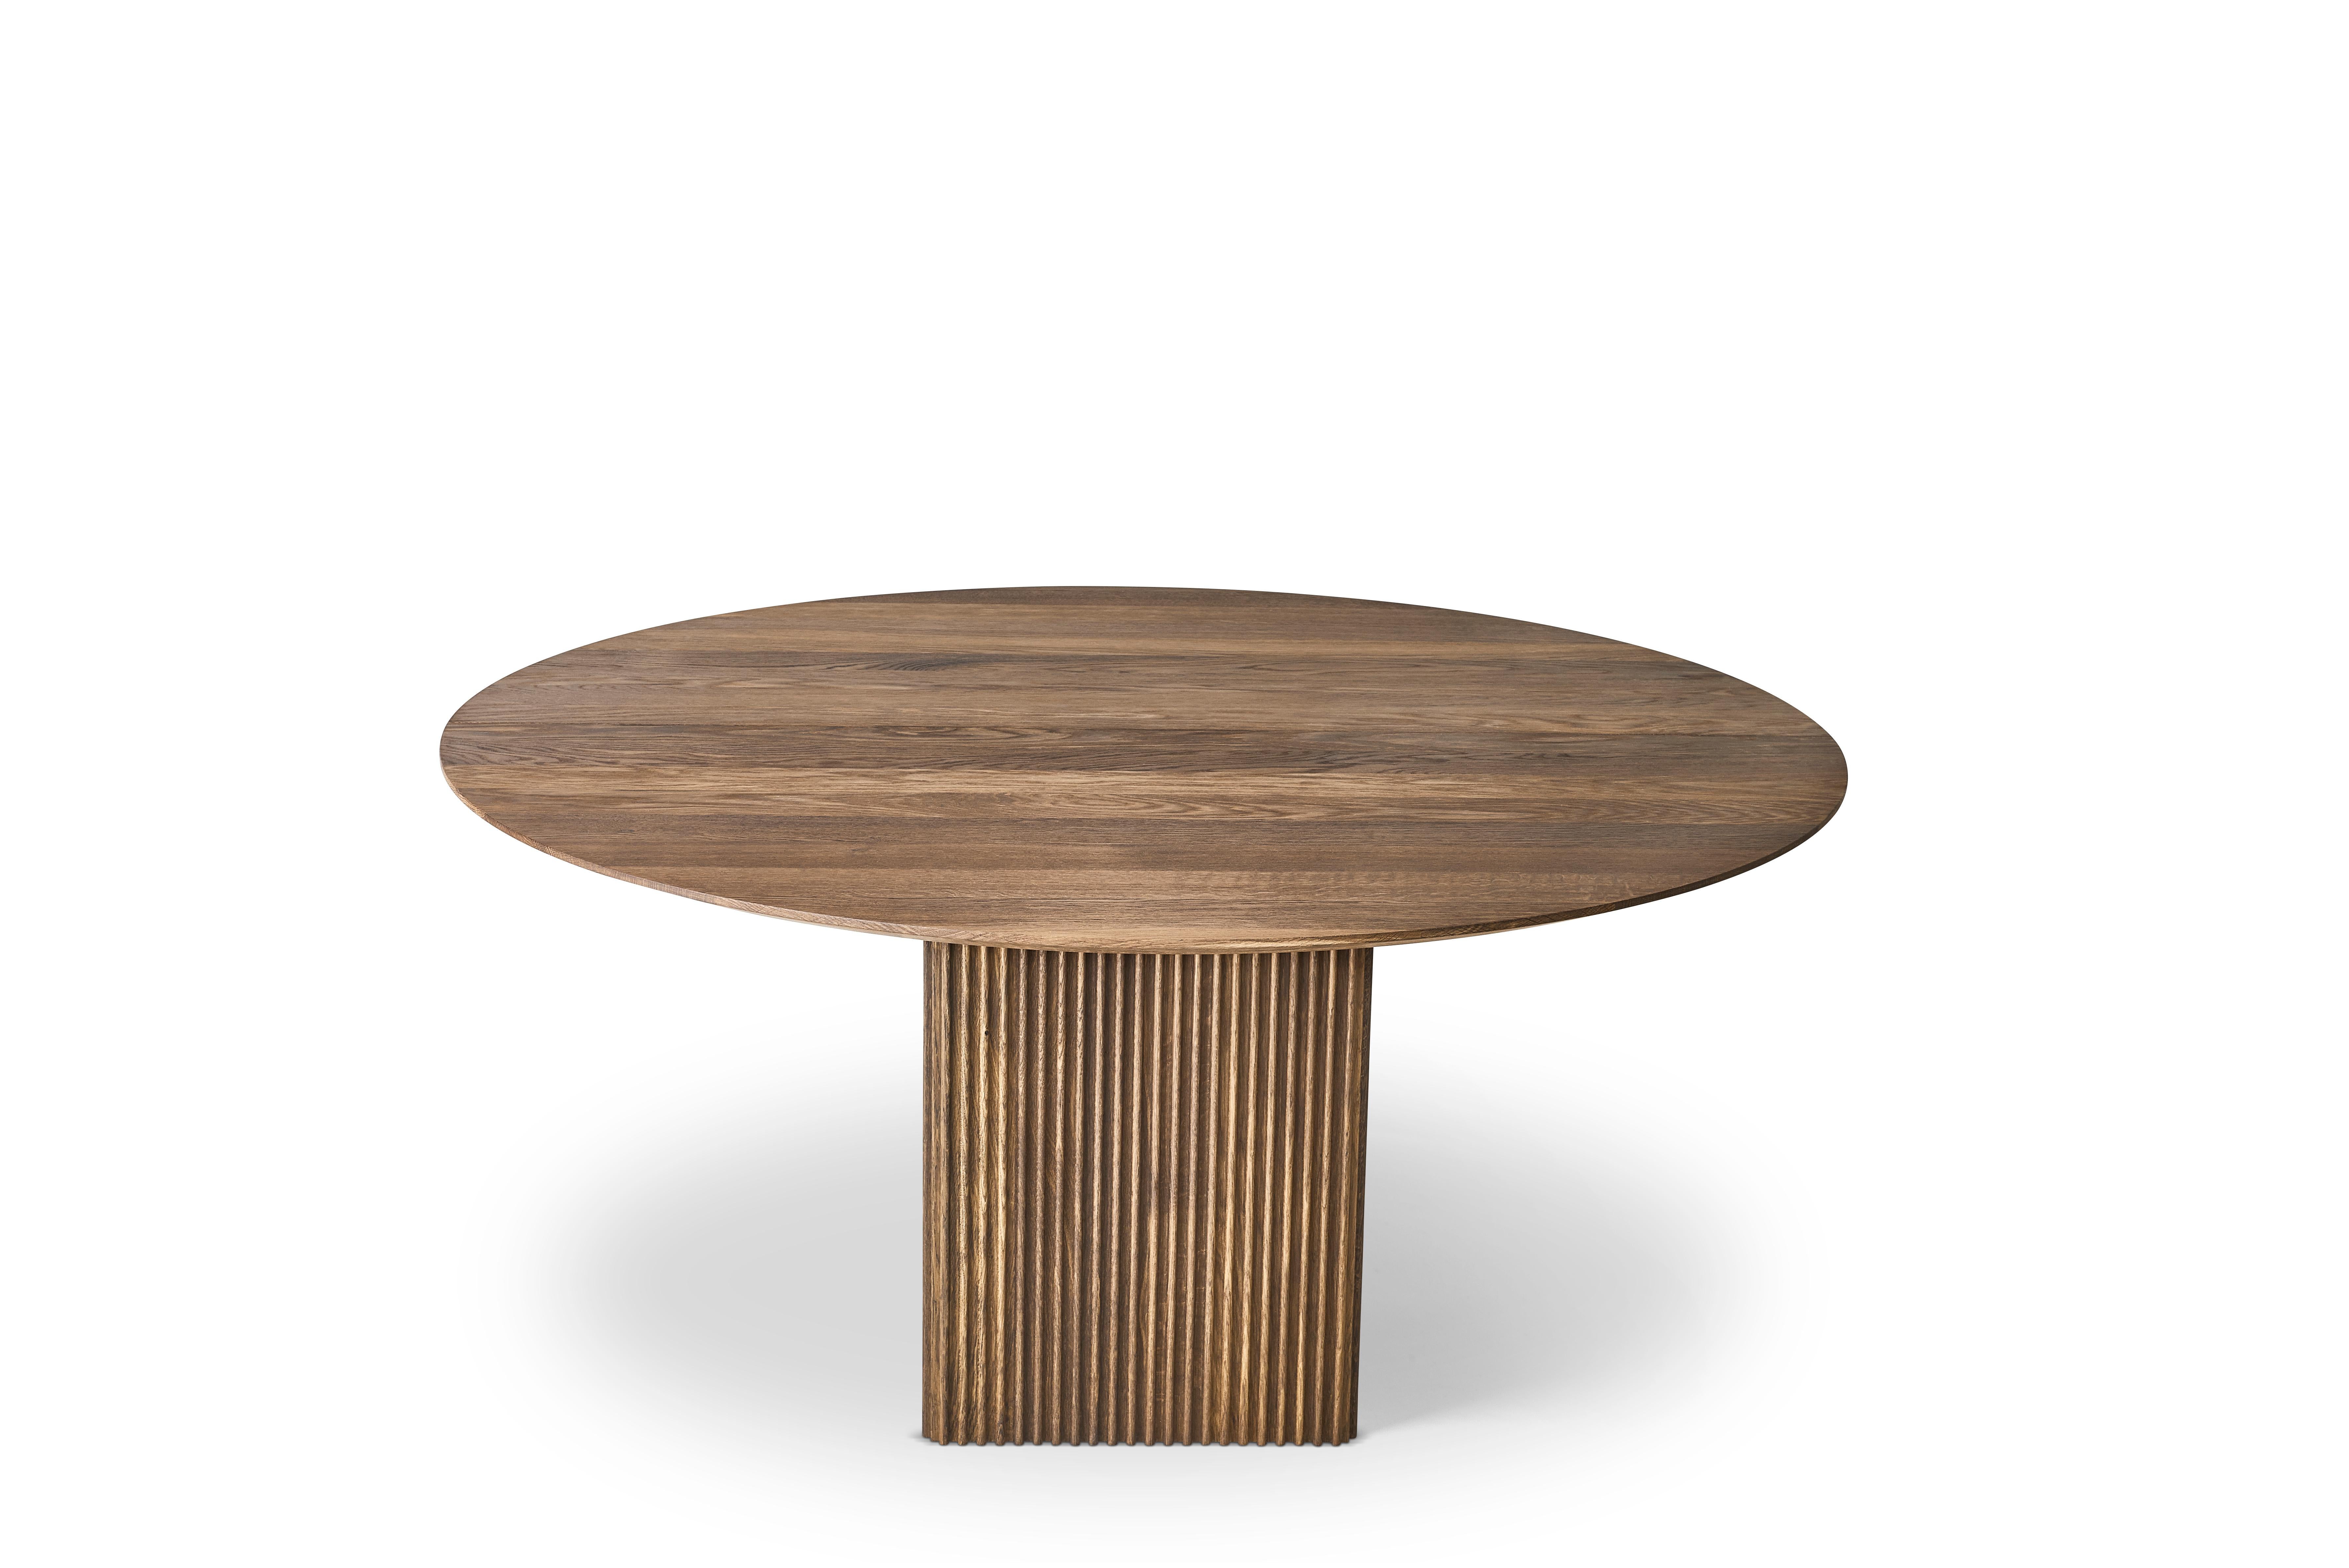 TEN Round Table 120 by DK3 
Solid wood tabletop and legs

Table height: 72 or 74 cm
Base dimension (depending on the tabletop size):
– 42 x 42 cm
– 47 x 47 cm

Tabletop diameter: 120 cm
Tabletop thickness: 3 cm

Wood :
– Oak
– Smoked